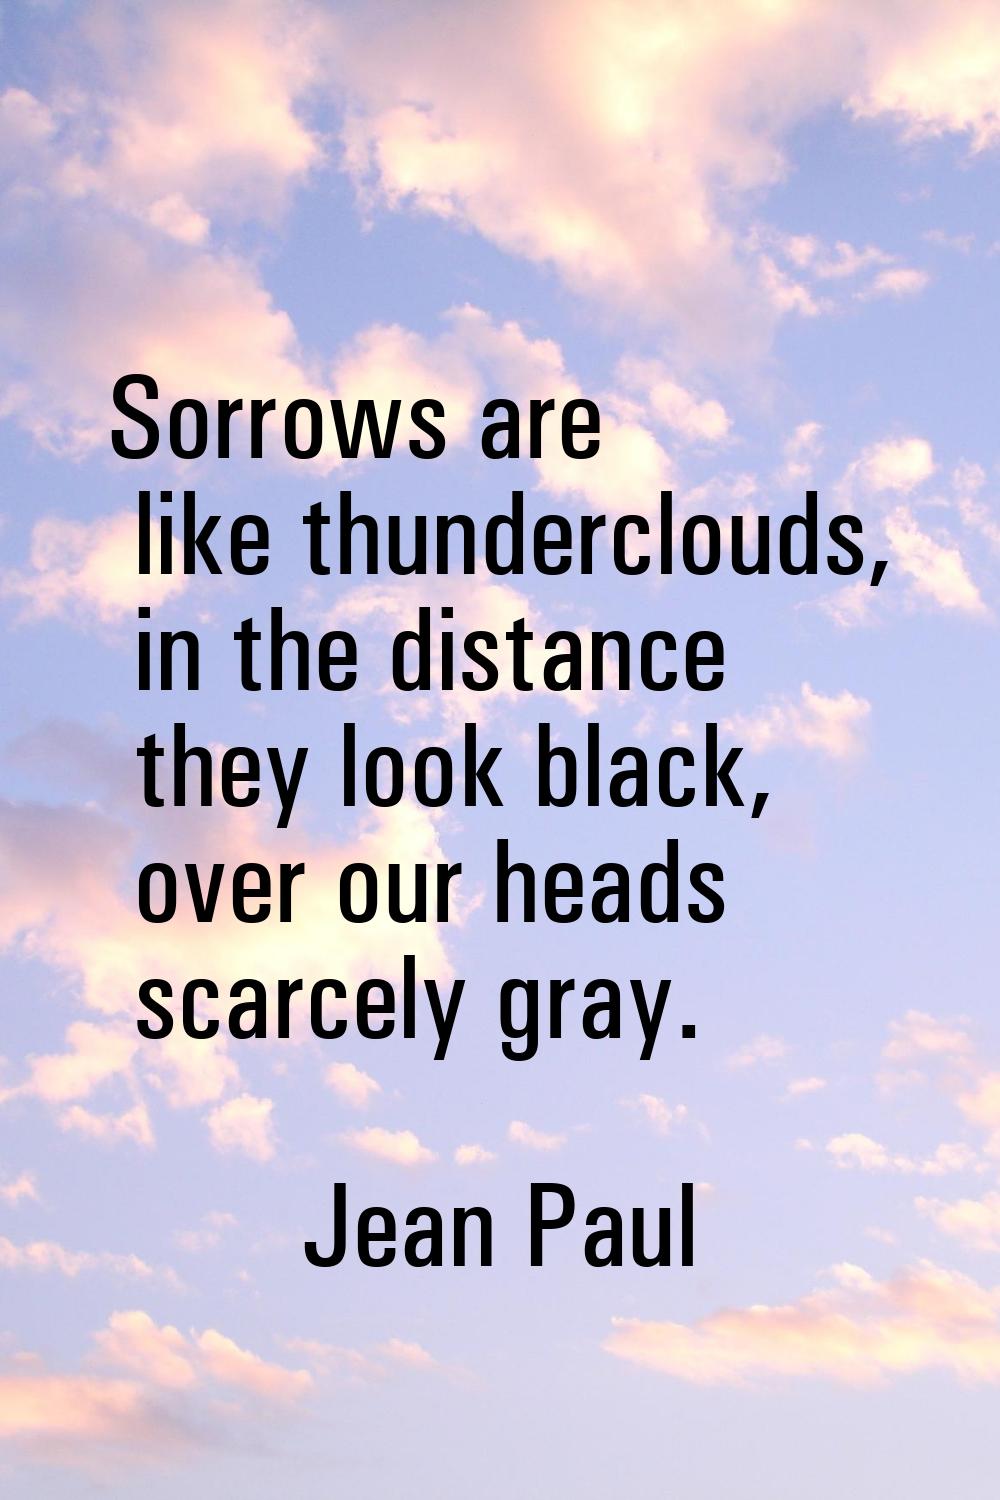 Sorrows are like thunderclouds, in the distance they look black, over our heads scarcely gray.